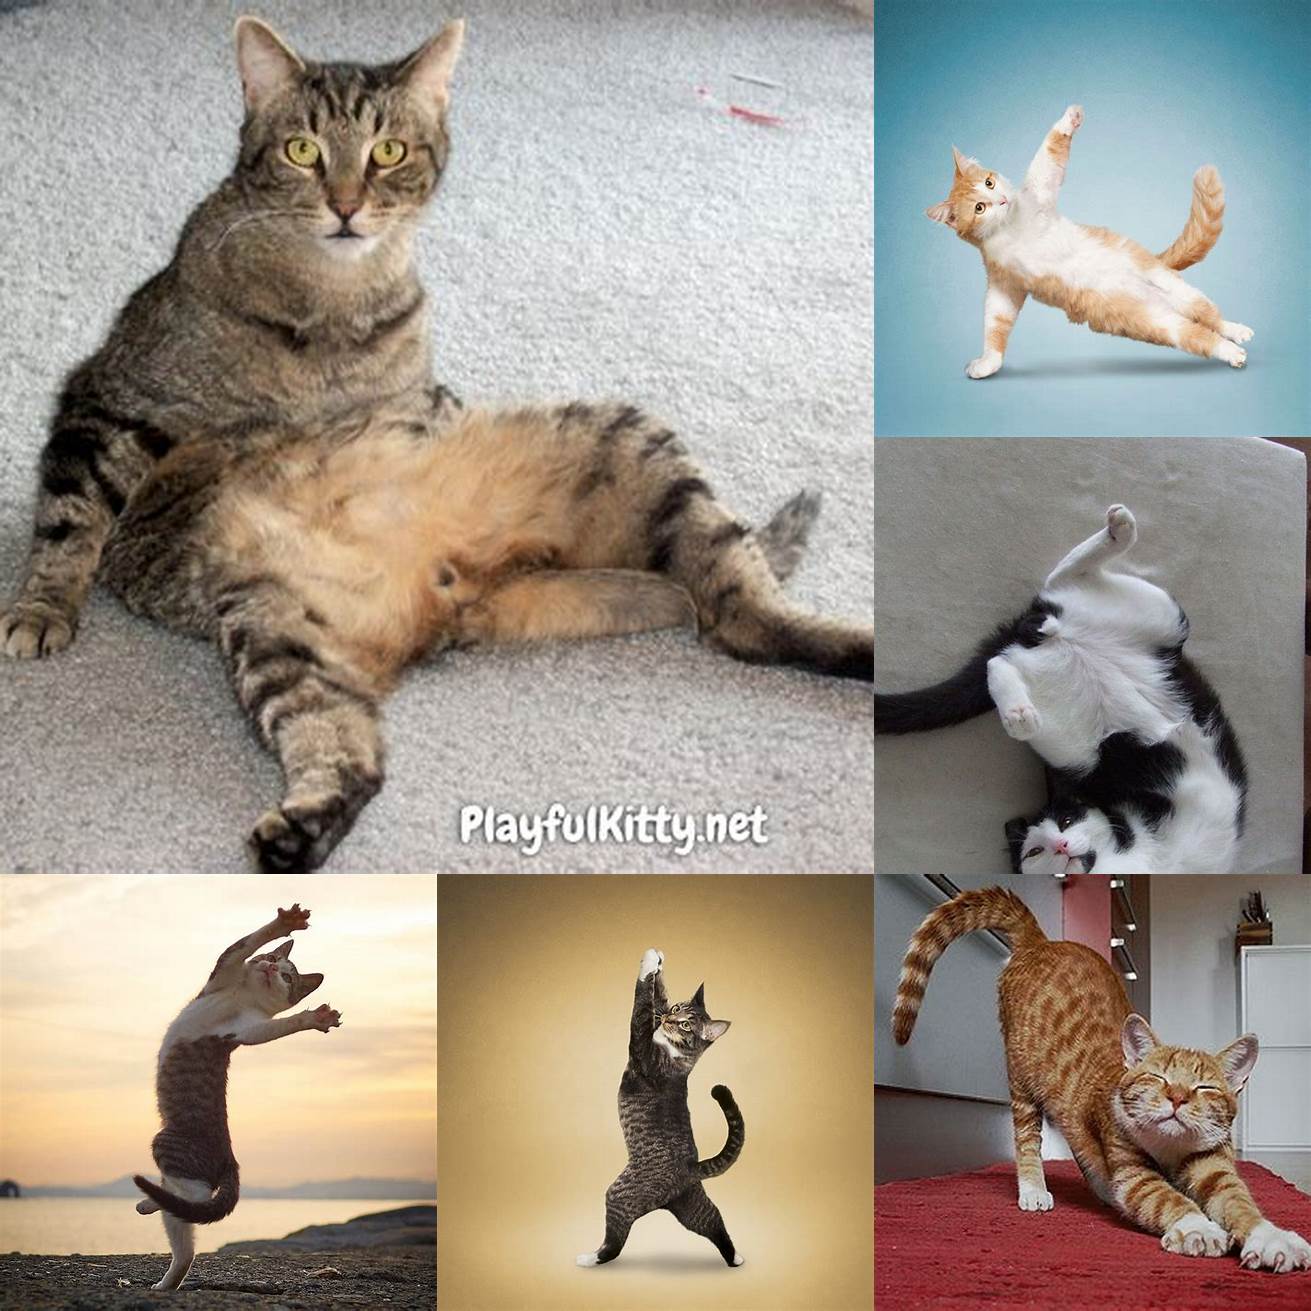 Funny cat poses